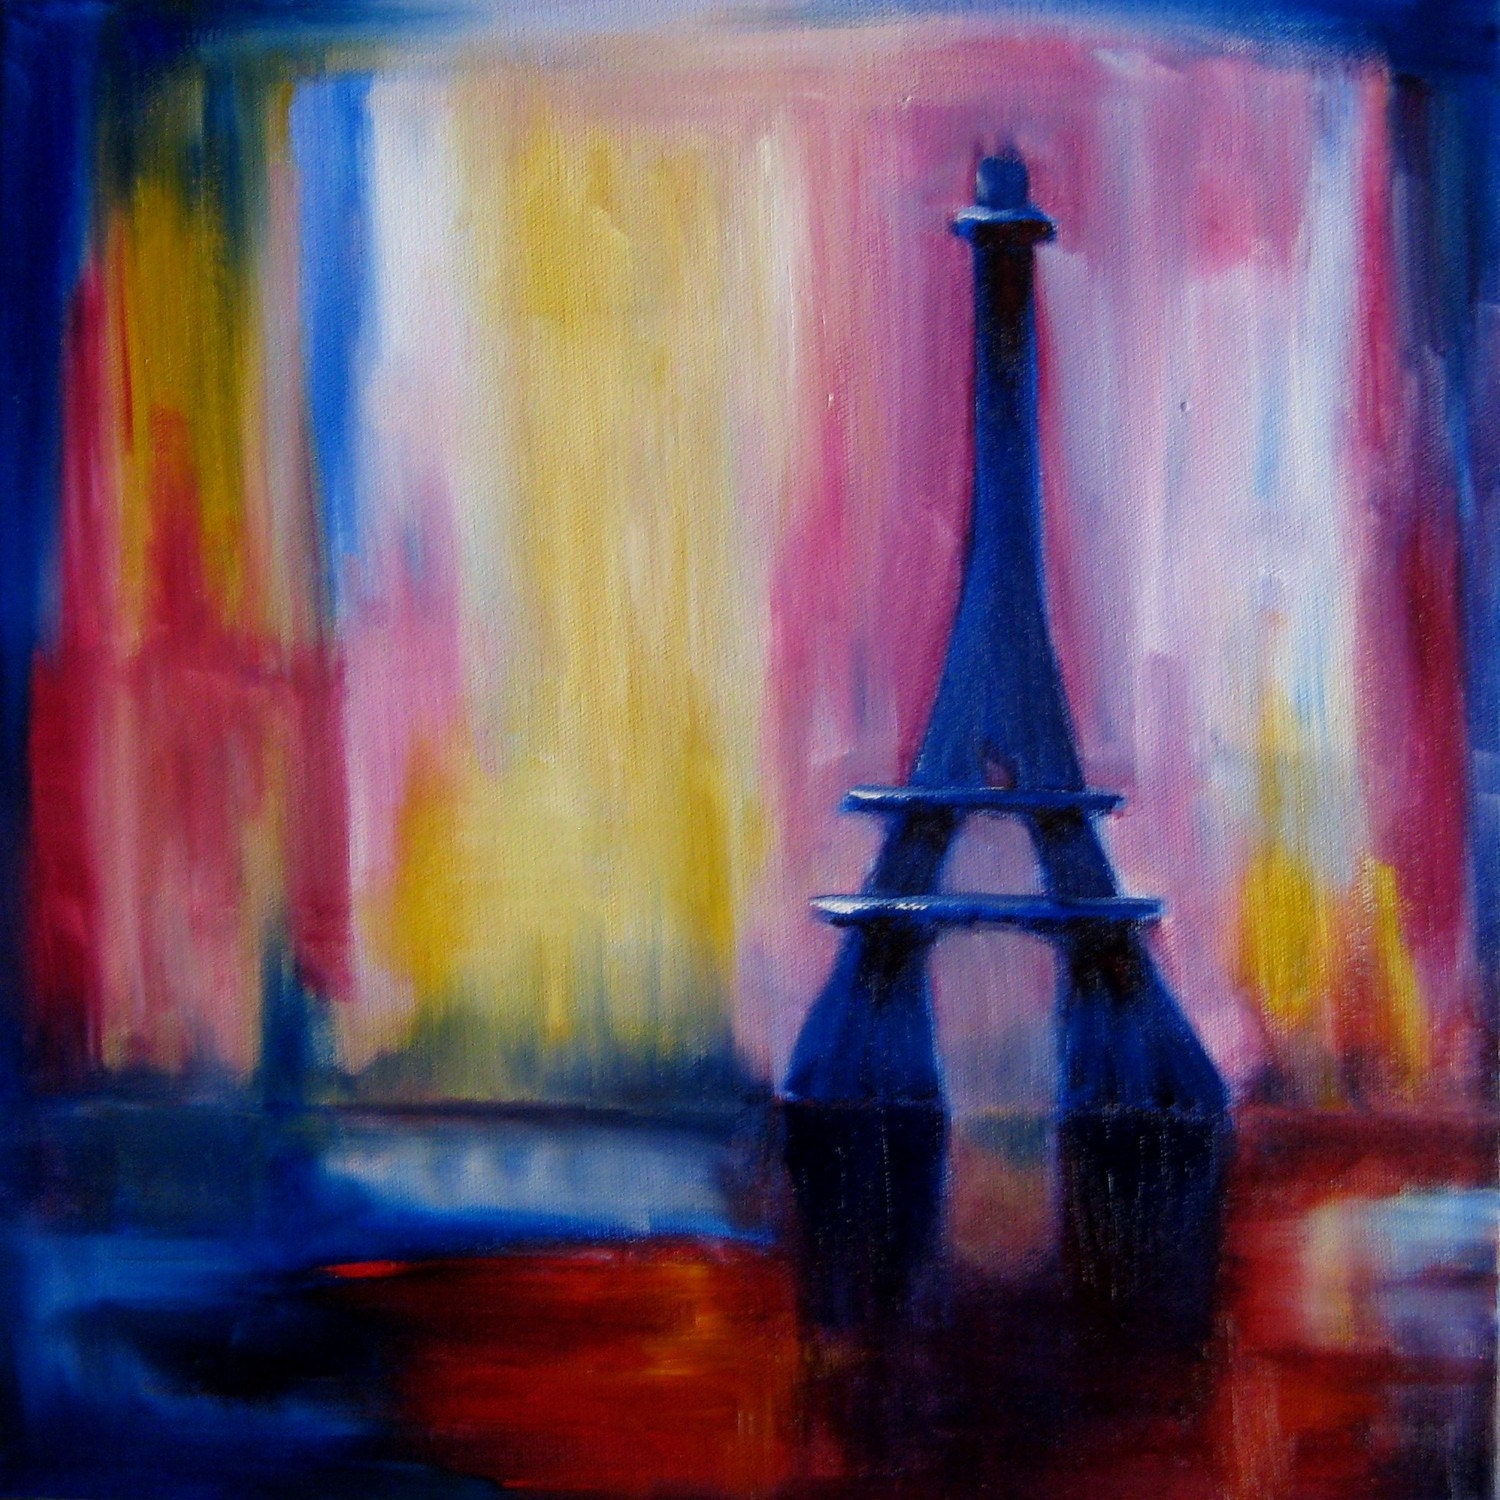 A Dream of Paris - 14x14 inch Original Abstract Oil Painting